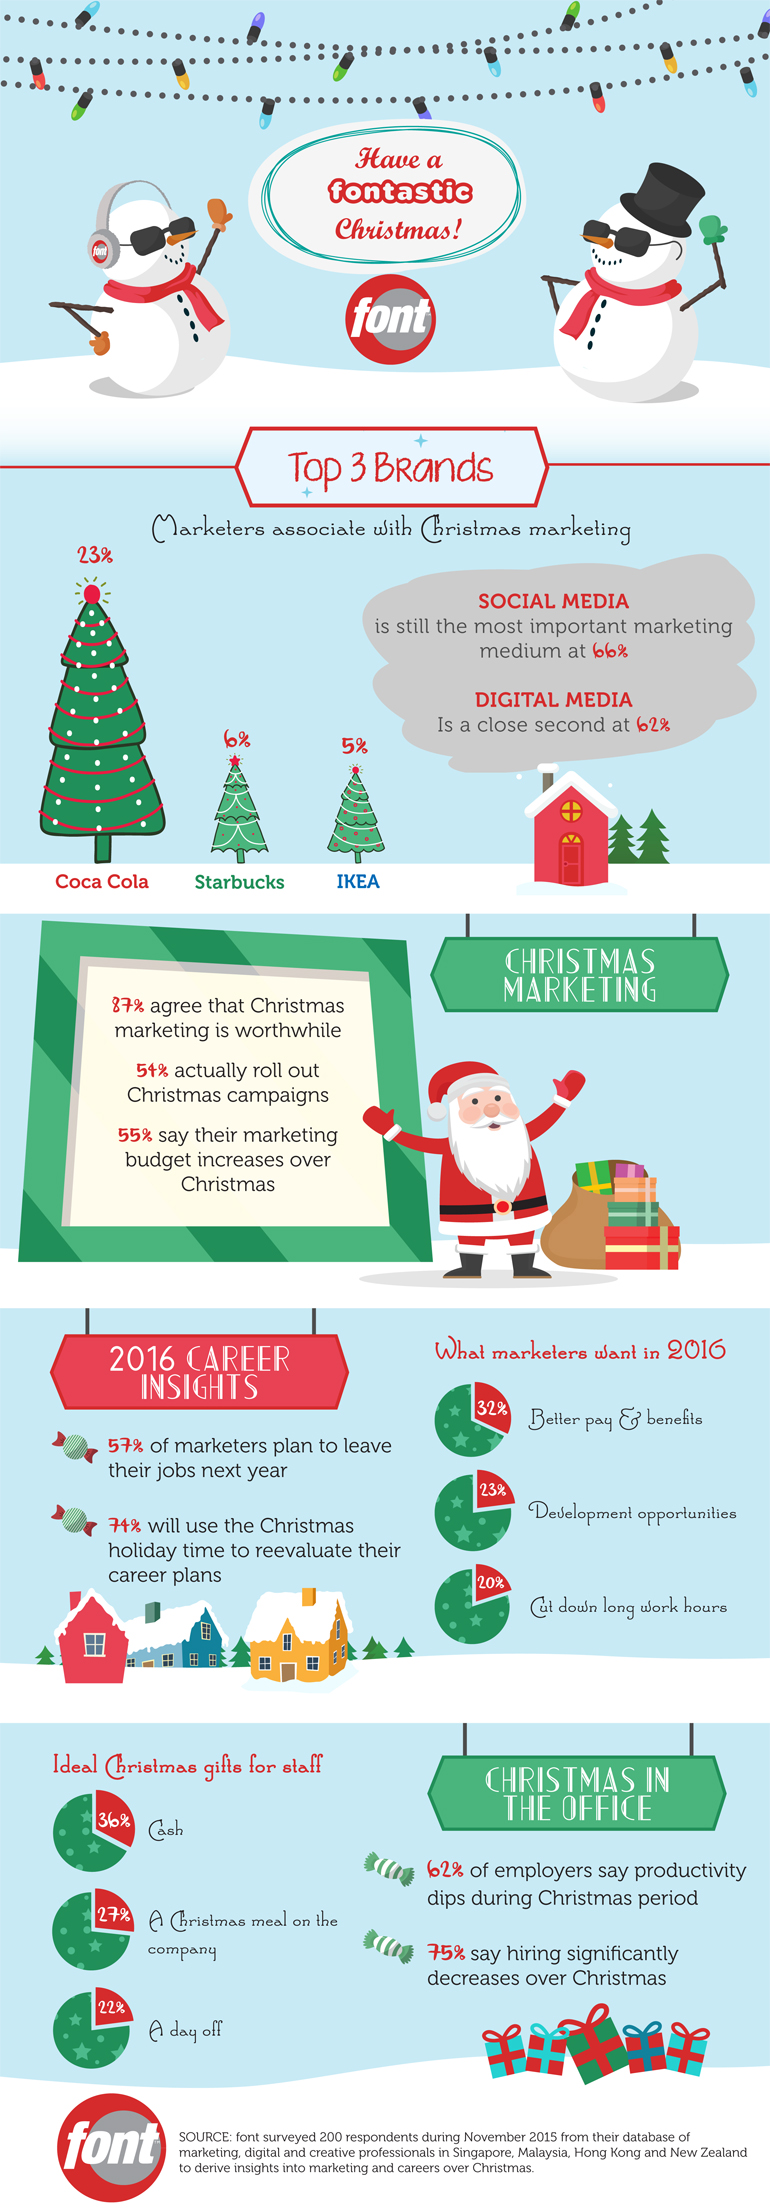 A Fontastic Christmas - Infographic